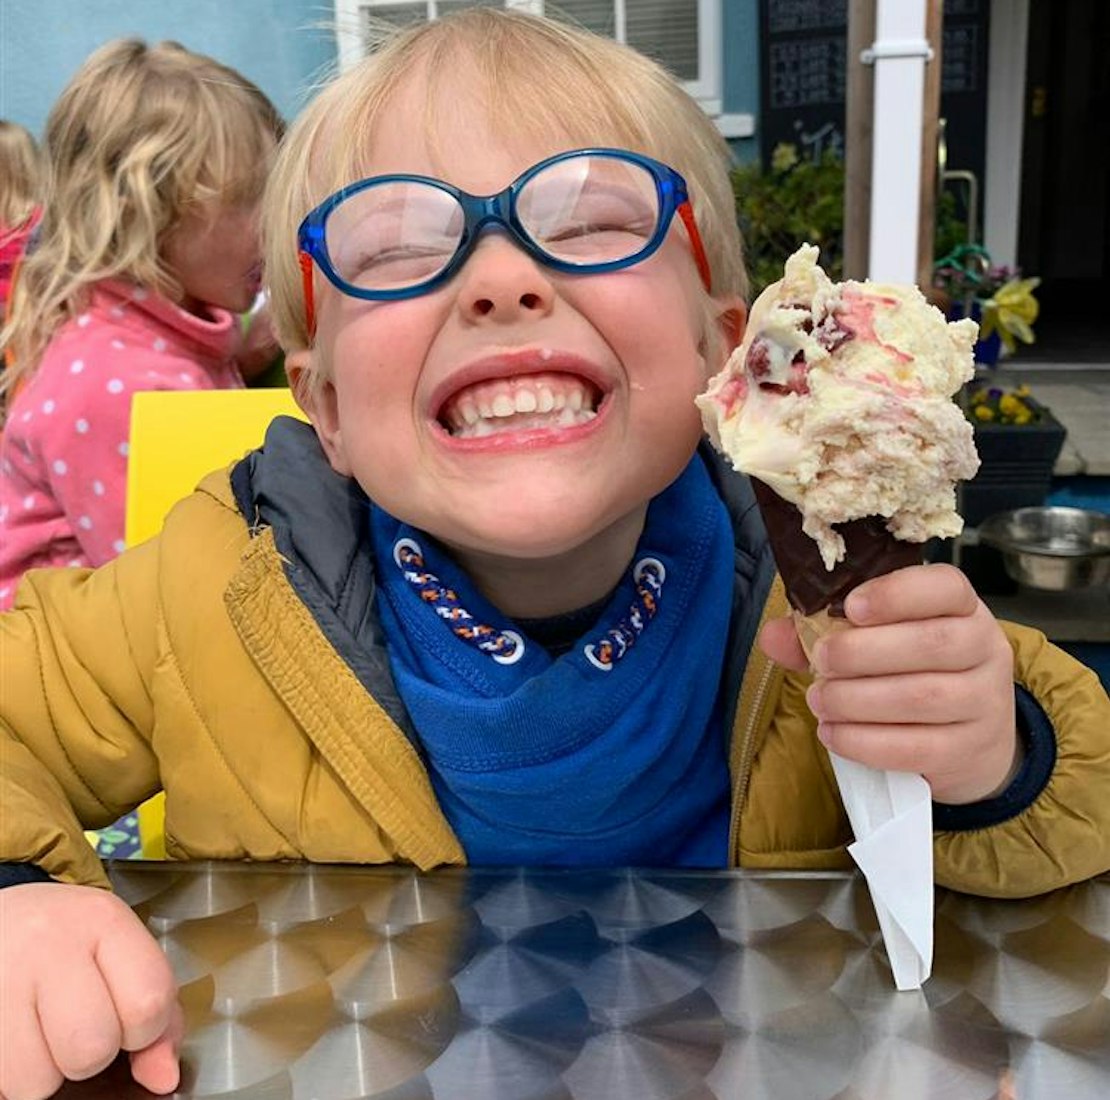 Larsen, wearing blue glasses, giving a big grin to the camera and holding a ice cream